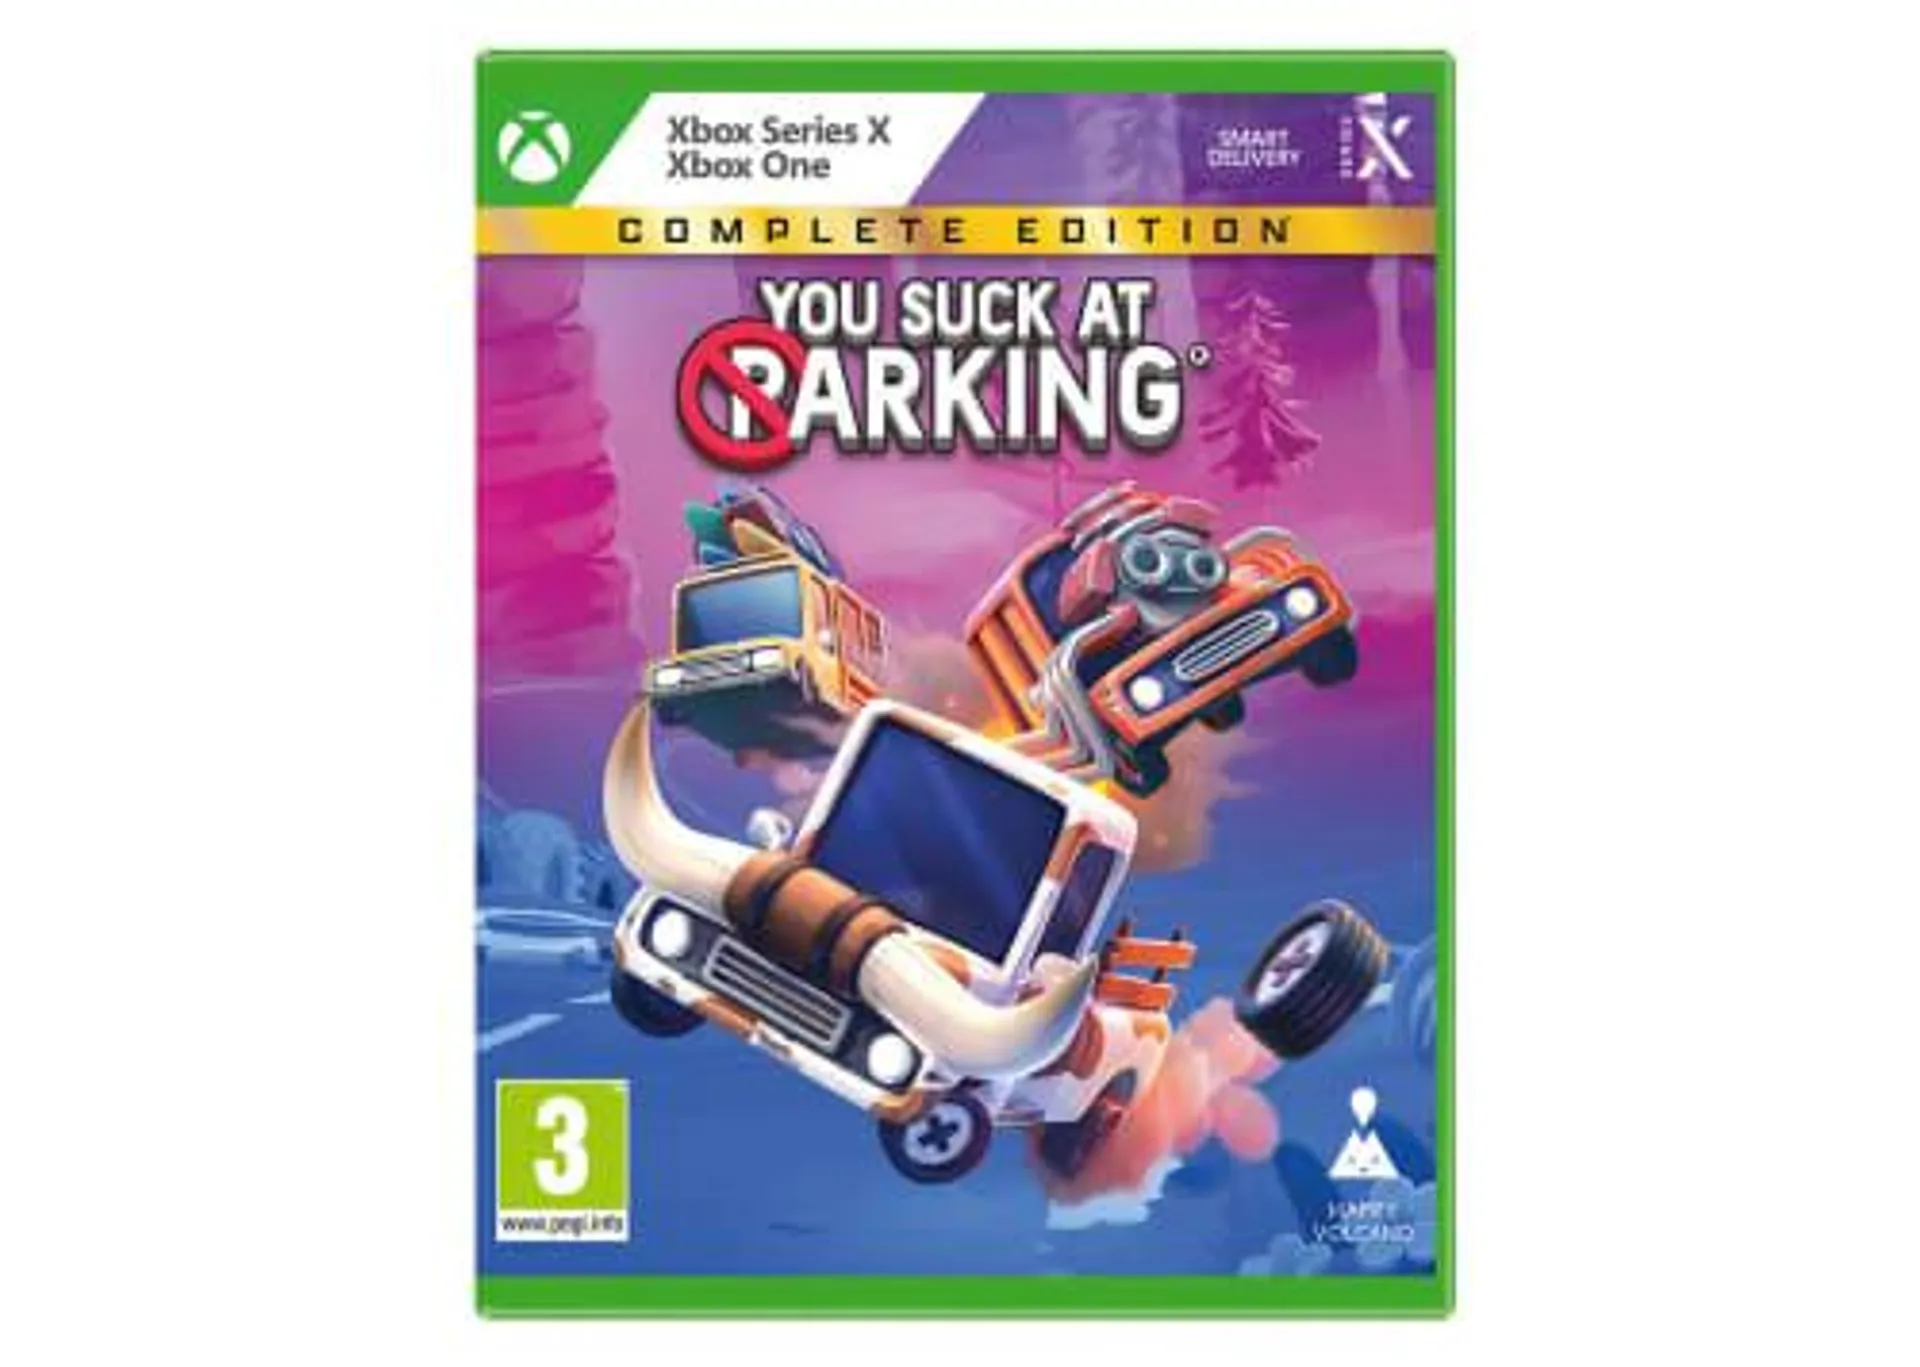 You Suck at Parking: Complete Edition (Xbox Series X)